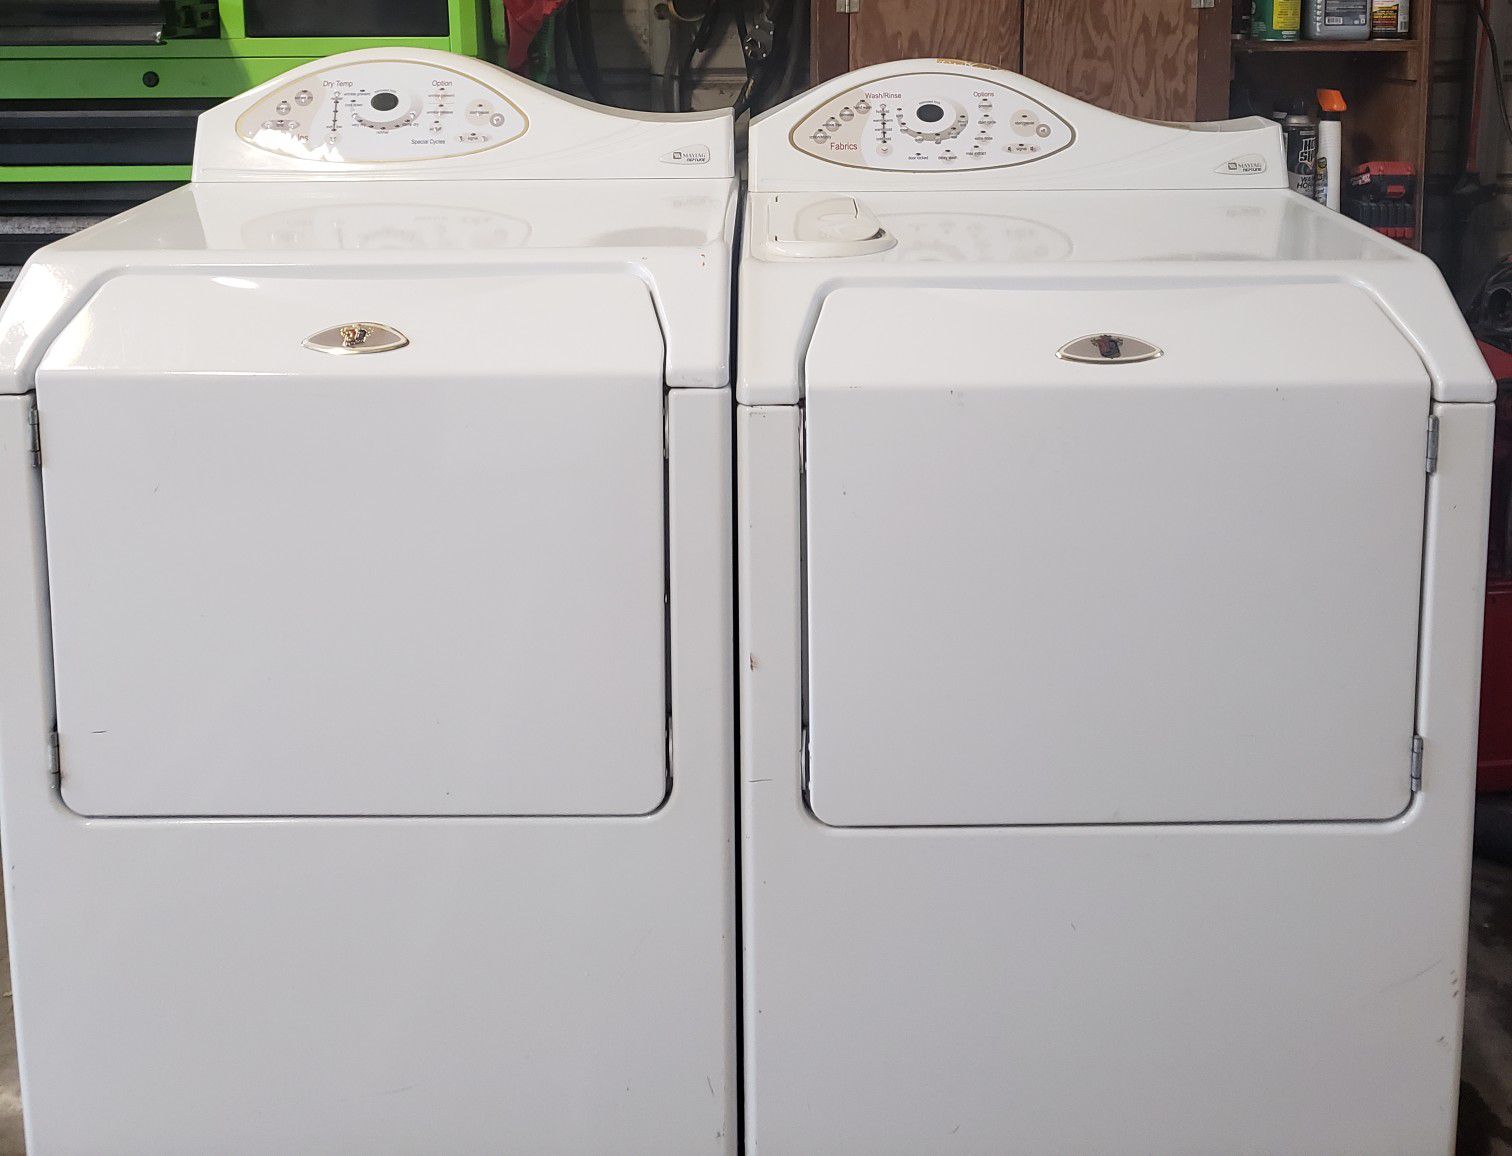 Maytag front load washer and dryer set